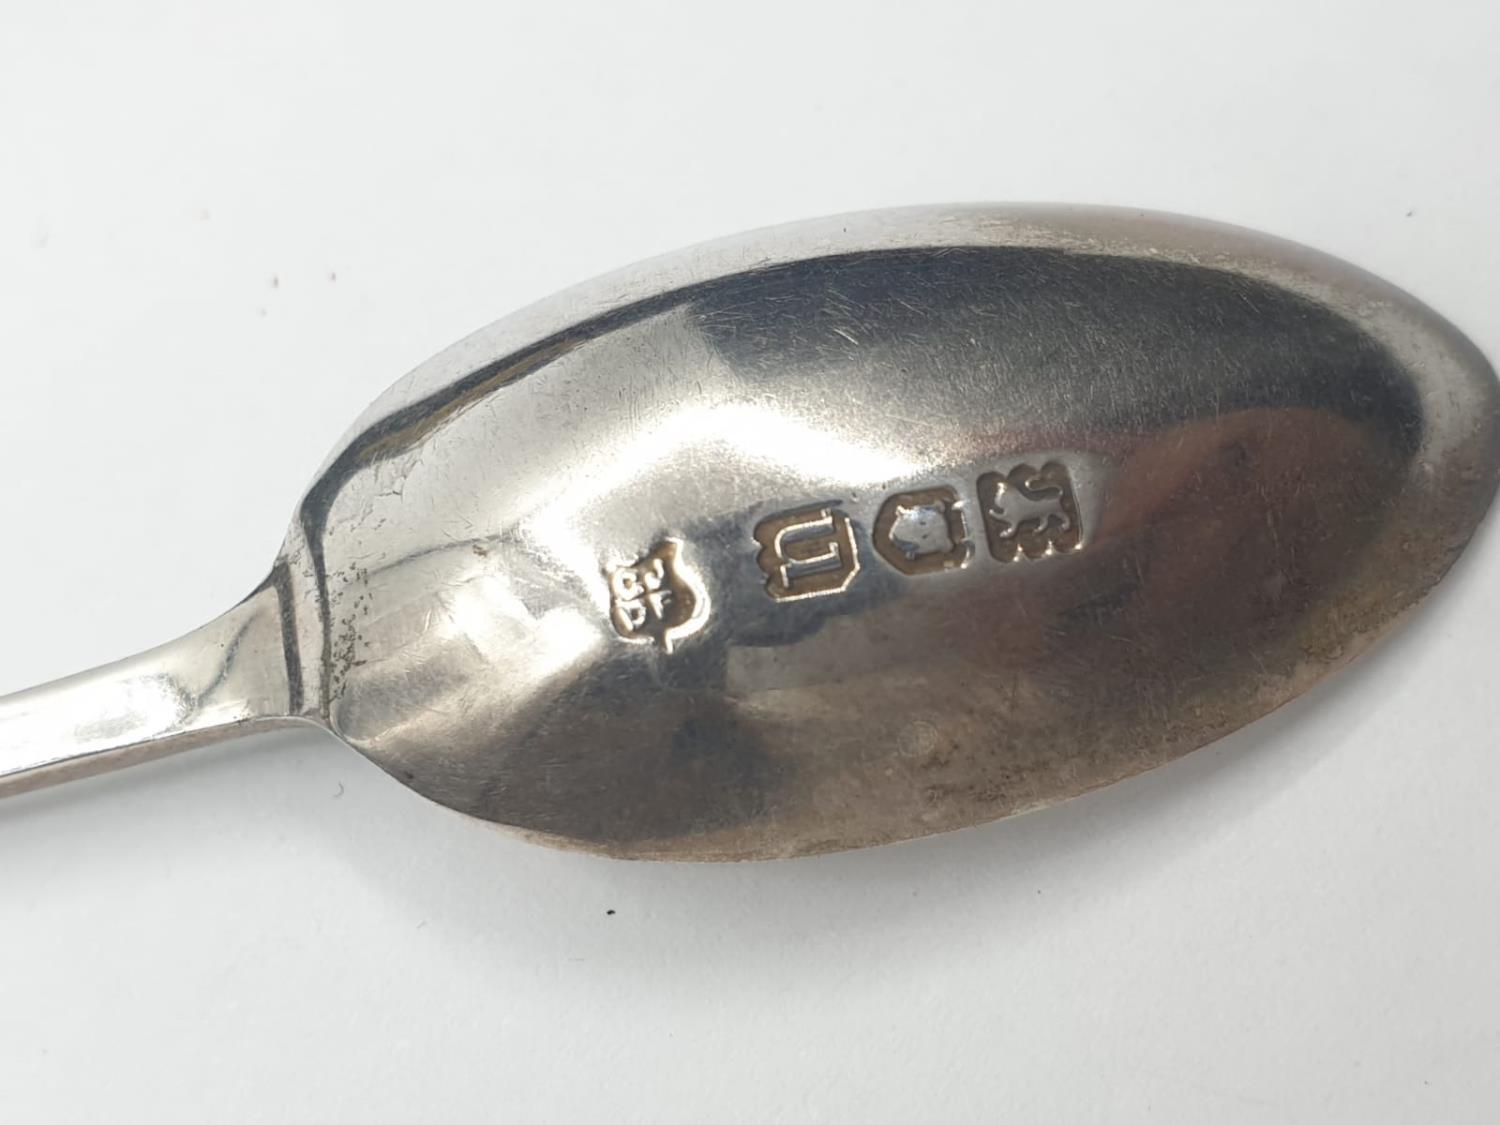 Antique set of 6 silver spoons. Each spoon hallmarked showing Josiah Williams London, 1915. - Image 2 of 3